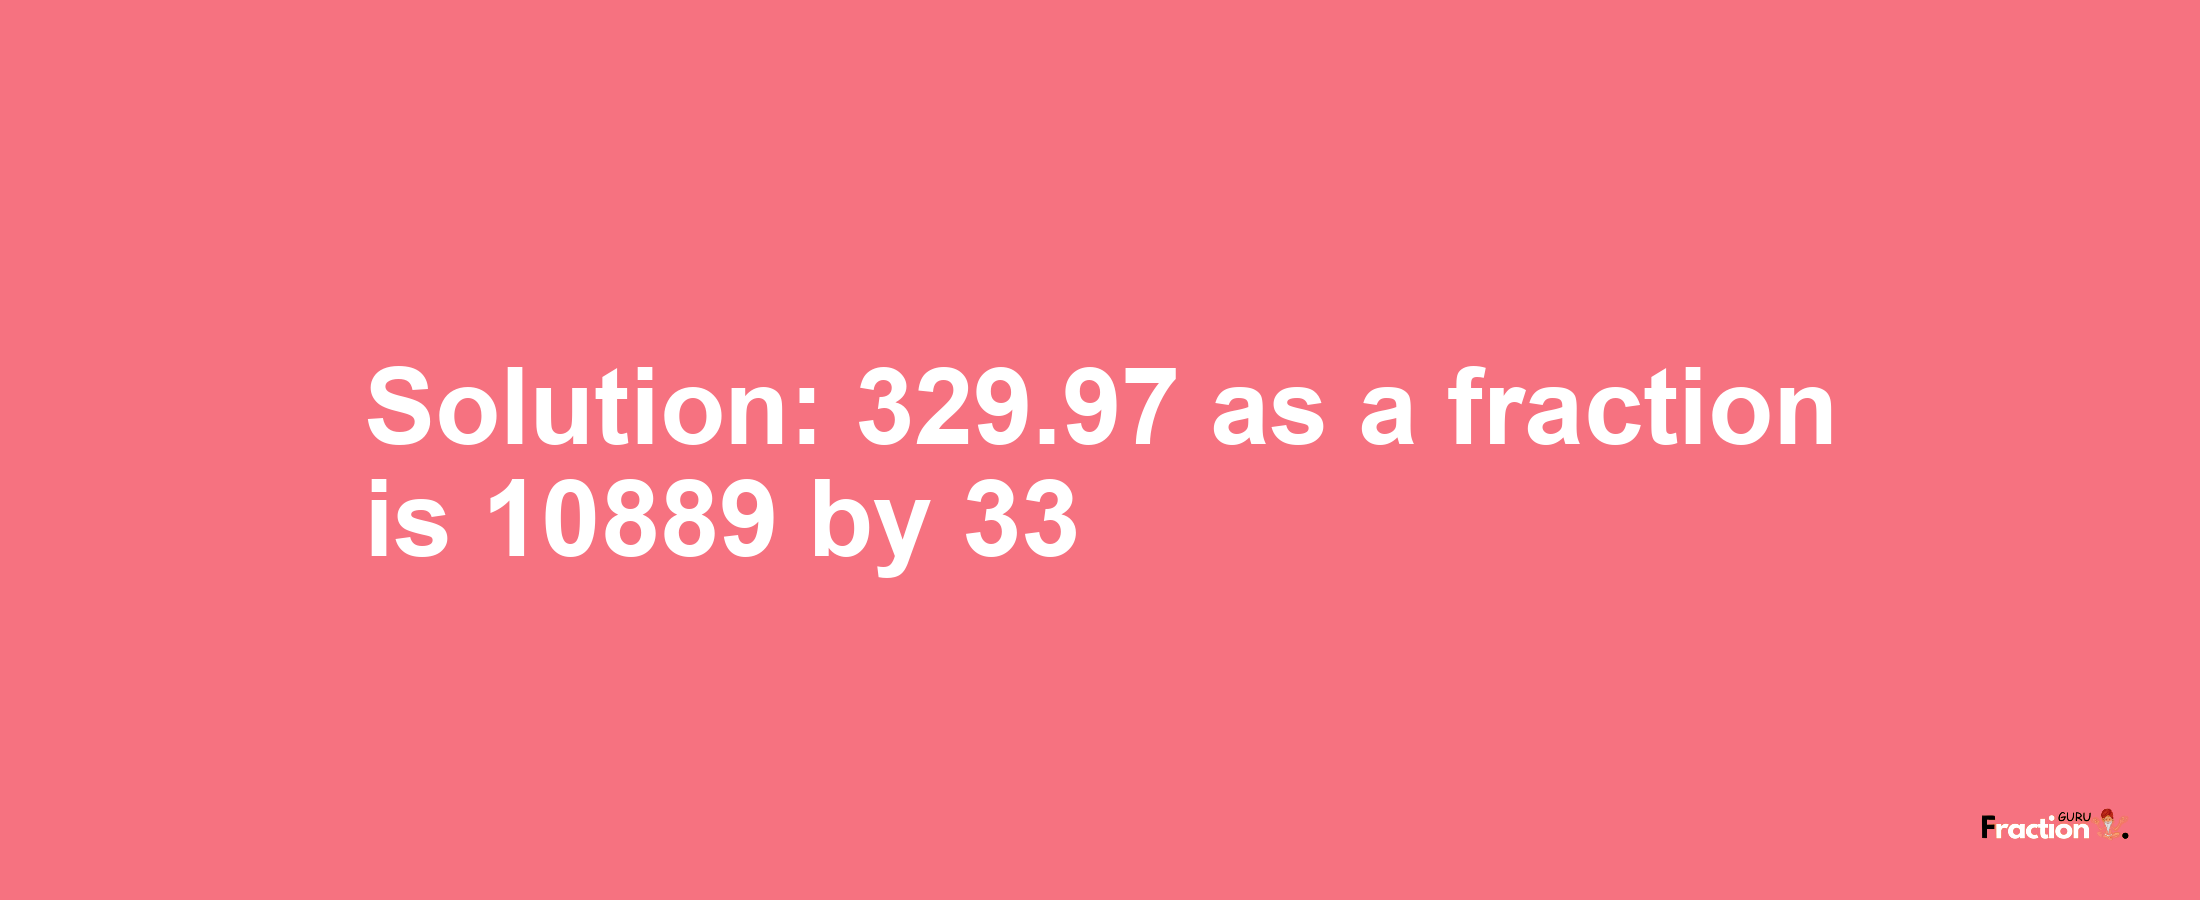 Solution:329.97 as a fraction is 10889/33